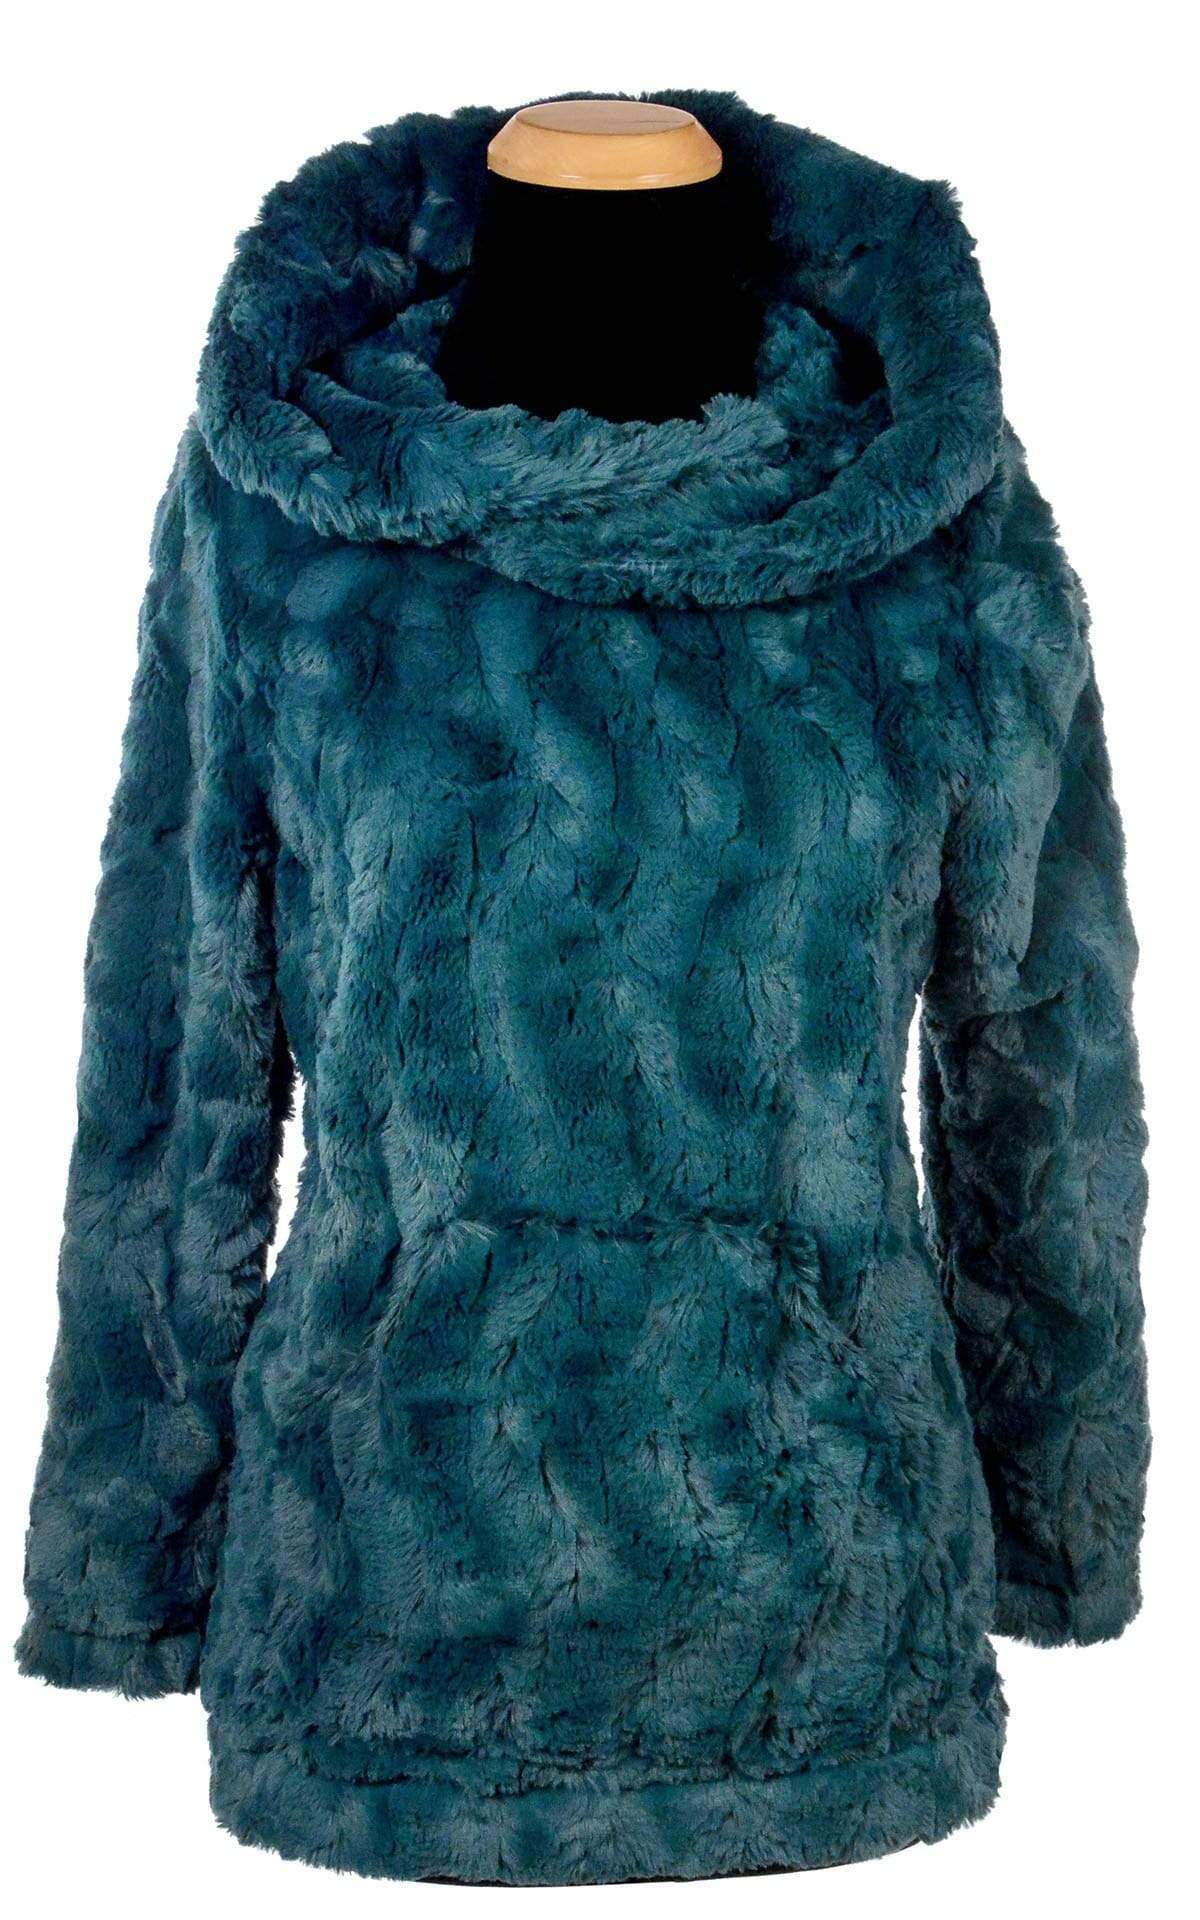 Hooded Lounger - Pandemonium Millinery Faux Fur Boutique made in